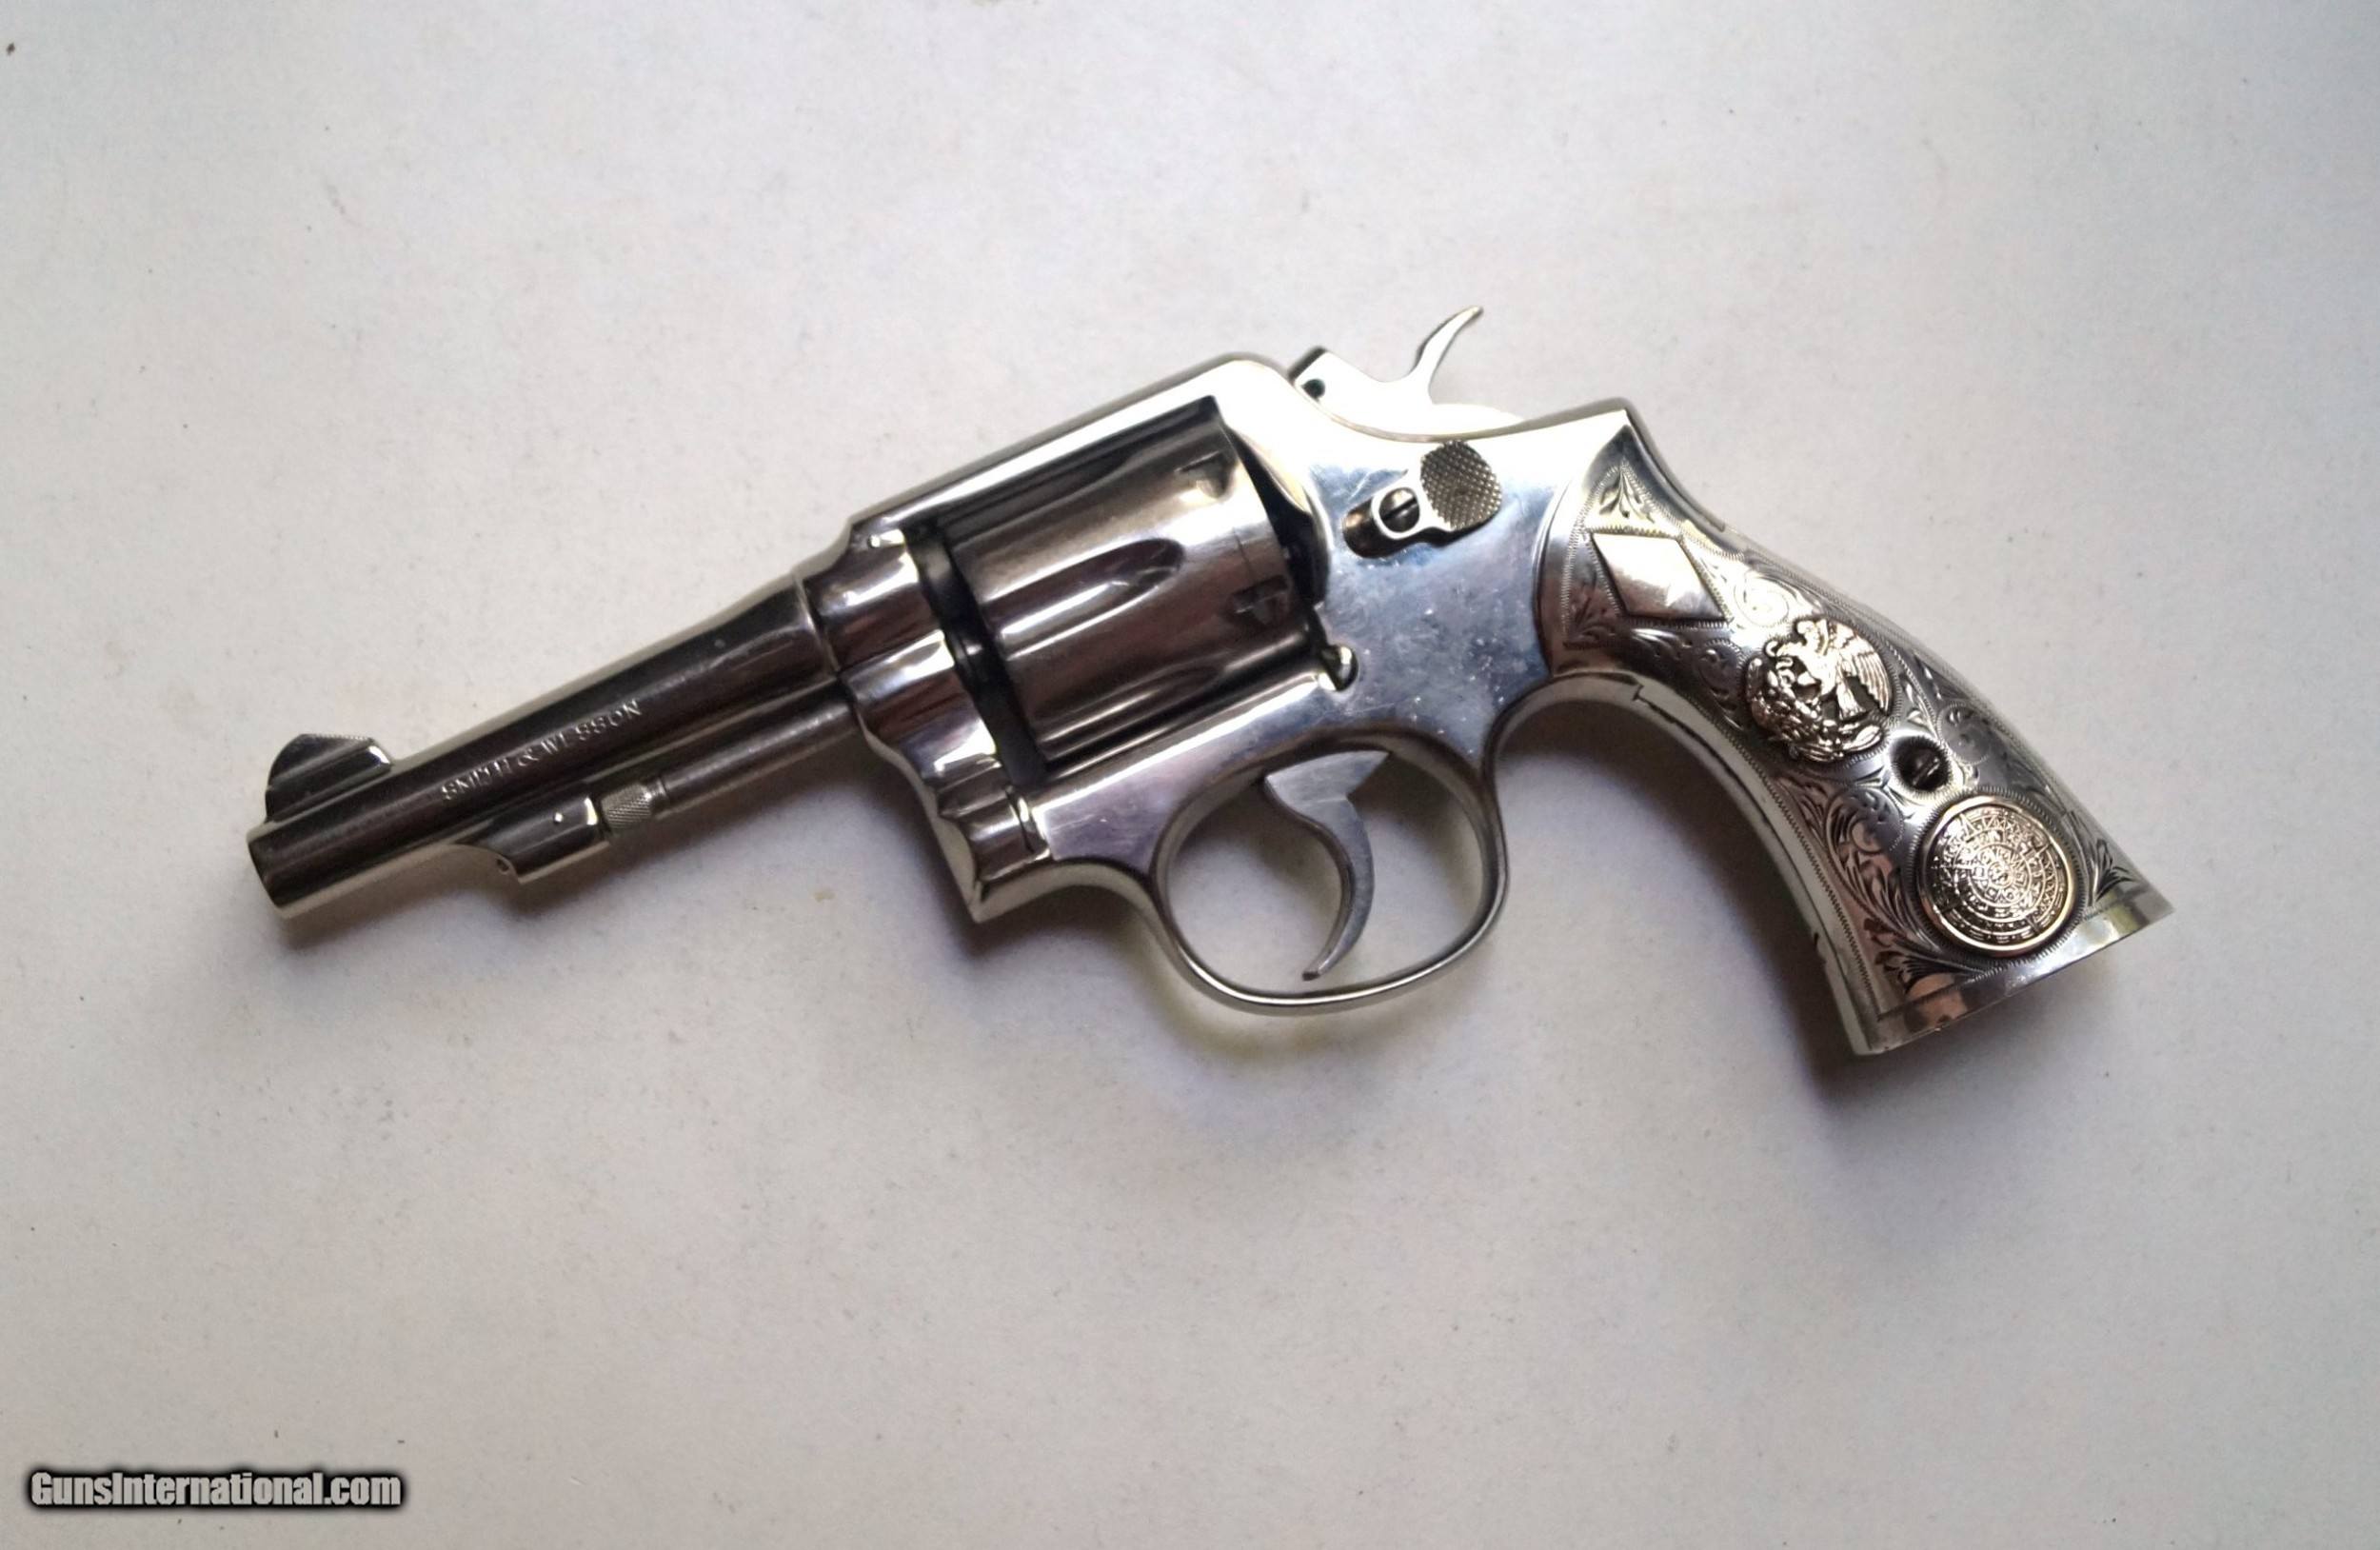 SMITH AND WESSON MODEL 10 WITH SILVER HAND MADE GRIPS - BEAUTIFUL